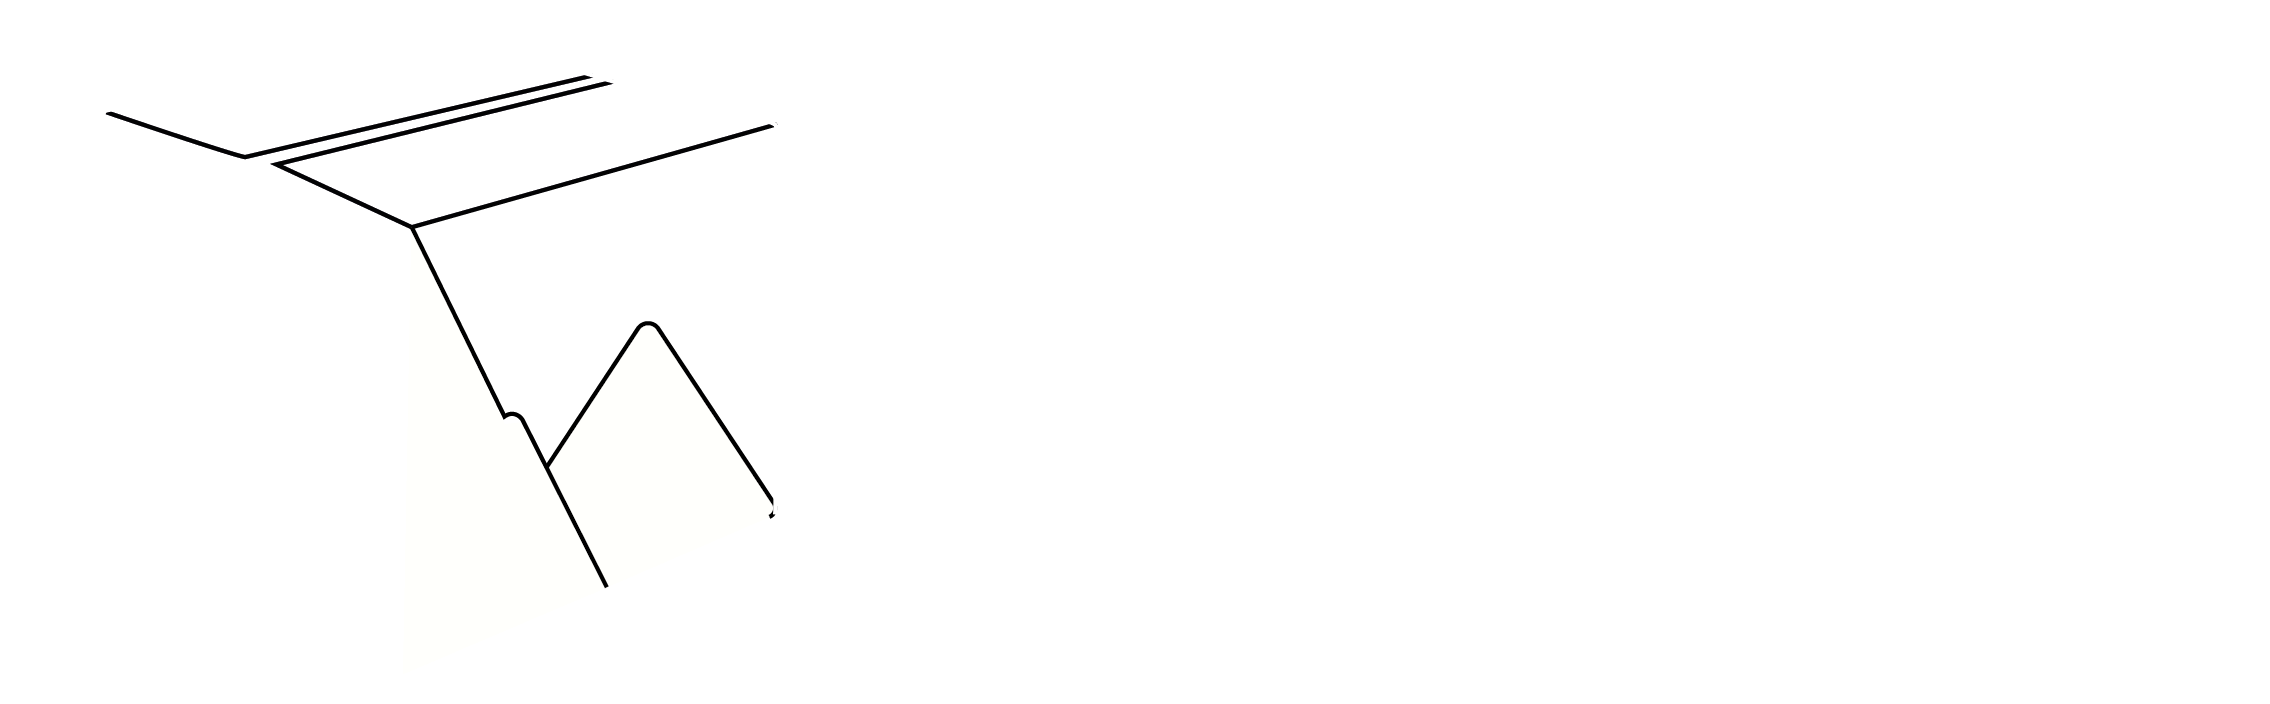 Les Petits Montagnards Outdoor Rental Experience